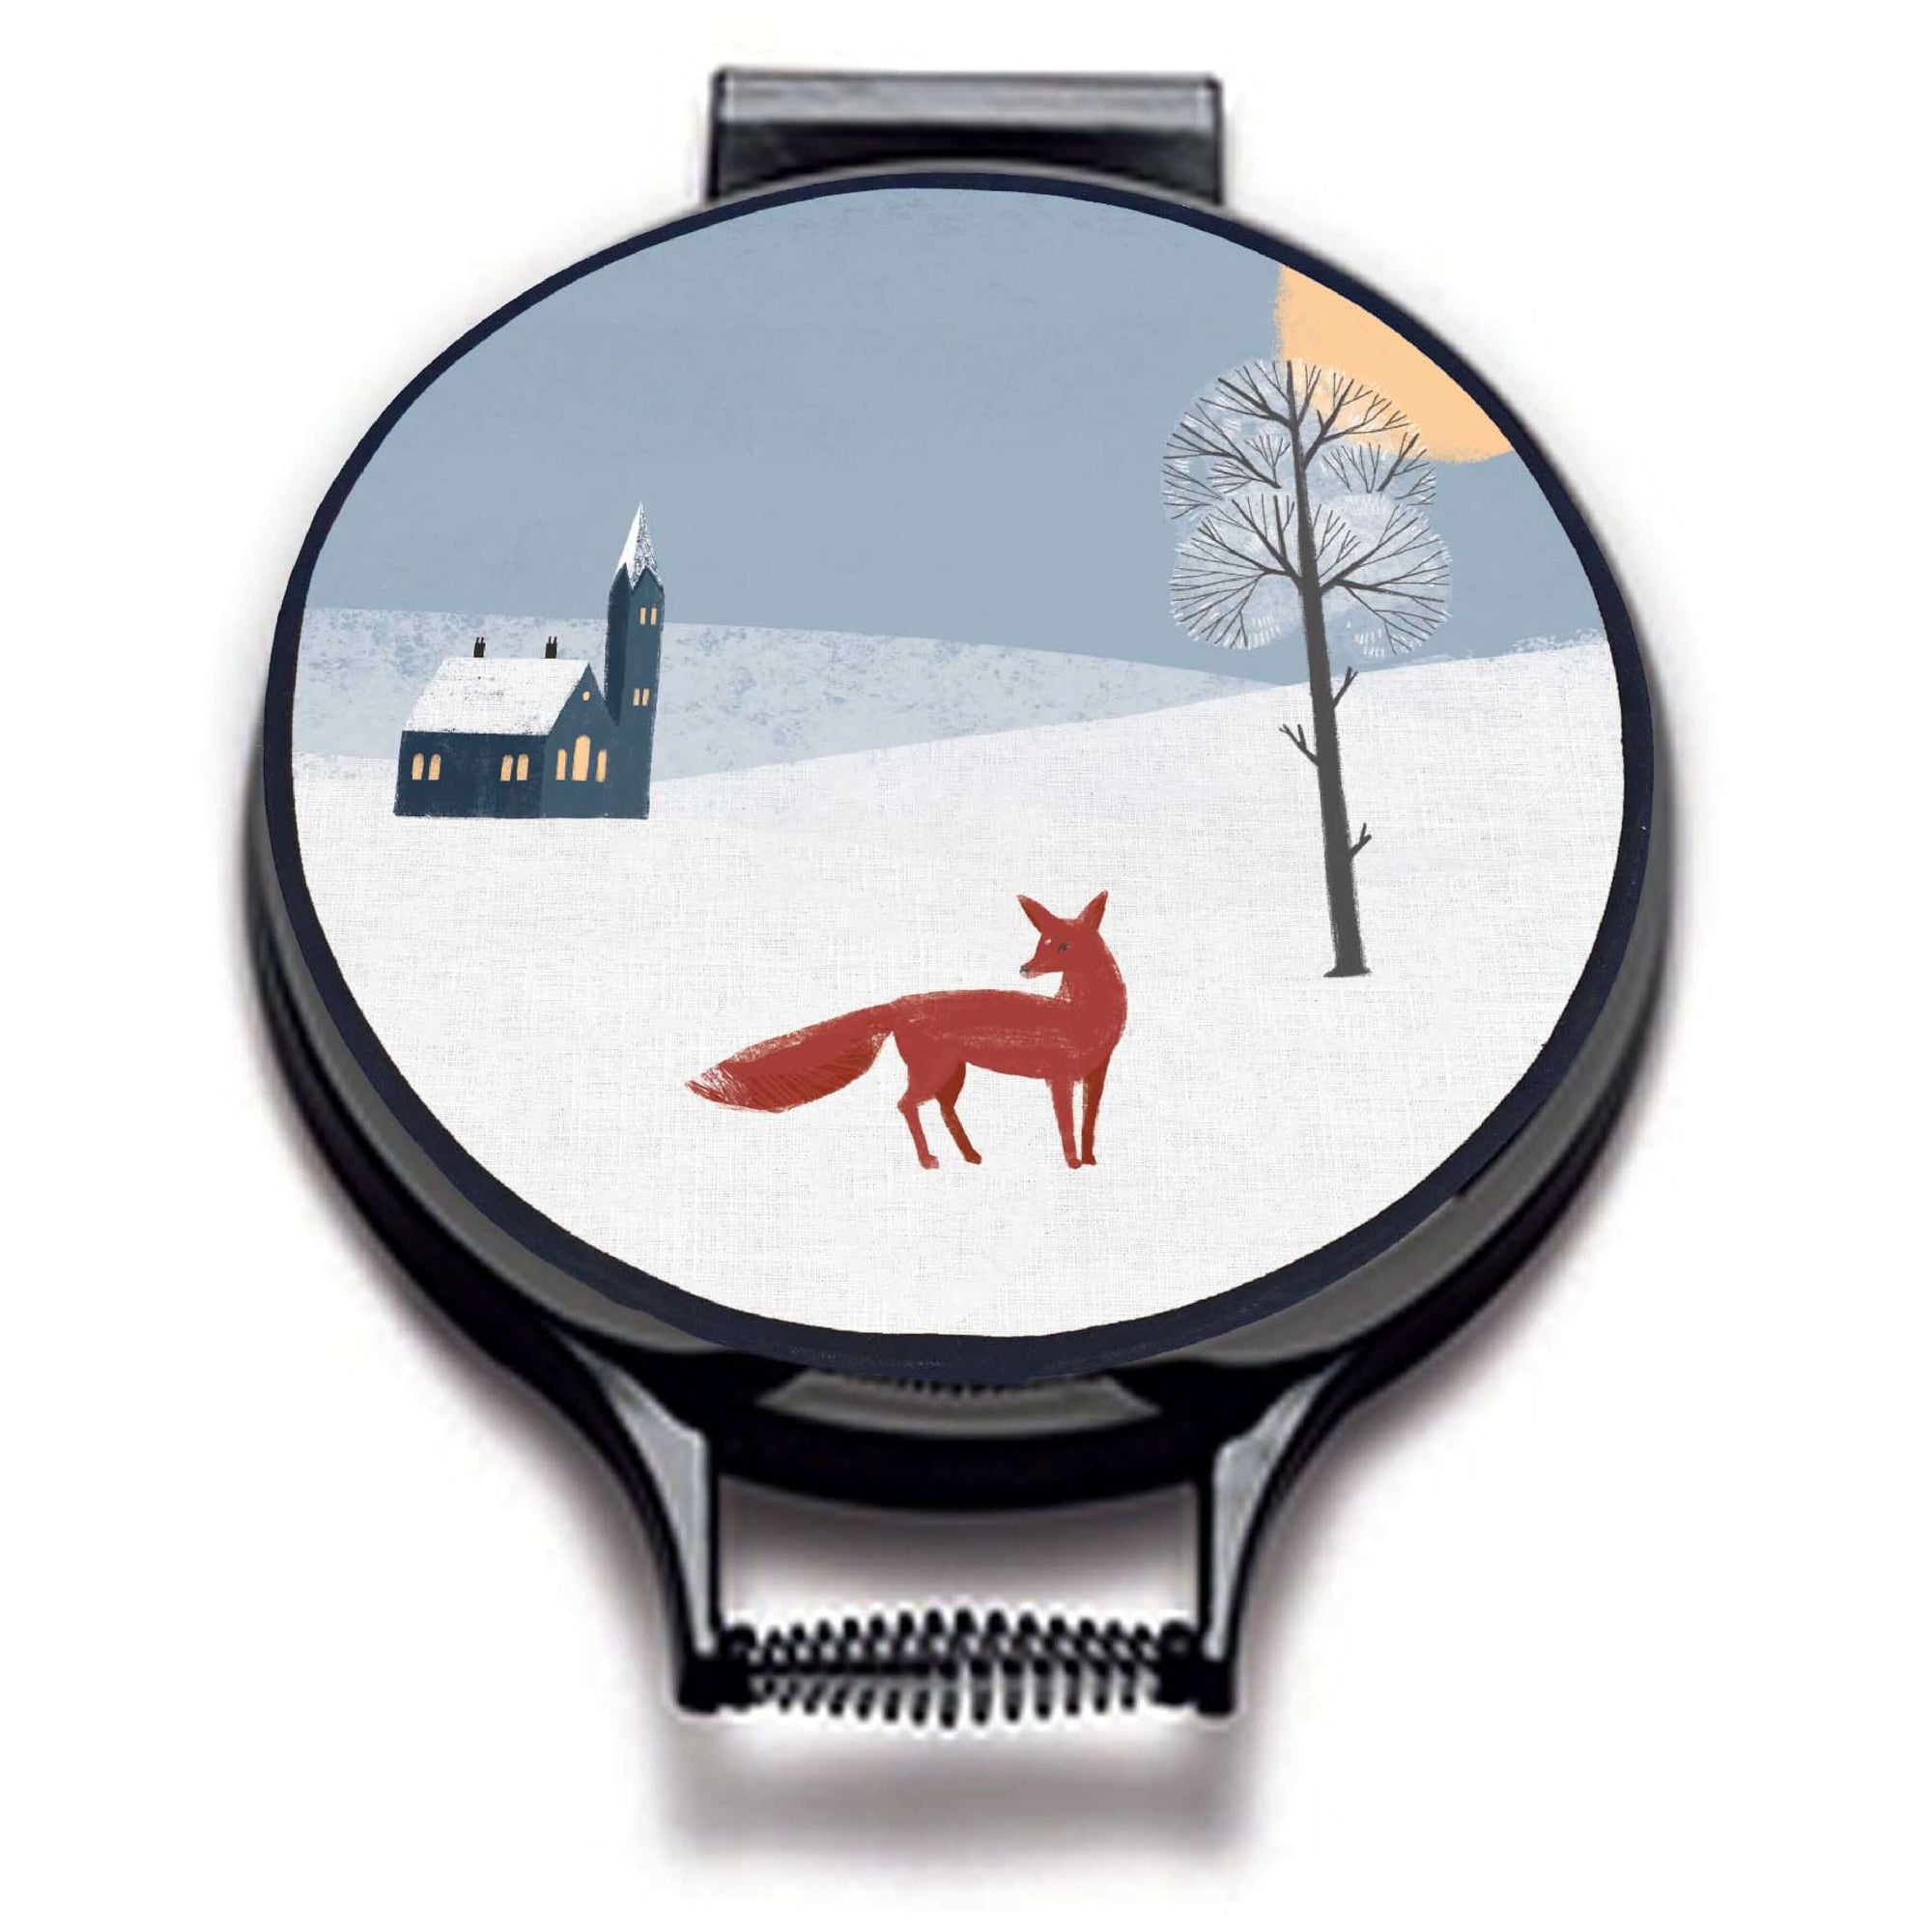 winter fox scandi modern print on a beige whith village scene including blue sky, a red fox, and church linen circular hob cover with black hemming. Pictured on metal cooker lid on an isolated background. Mustard and Gray